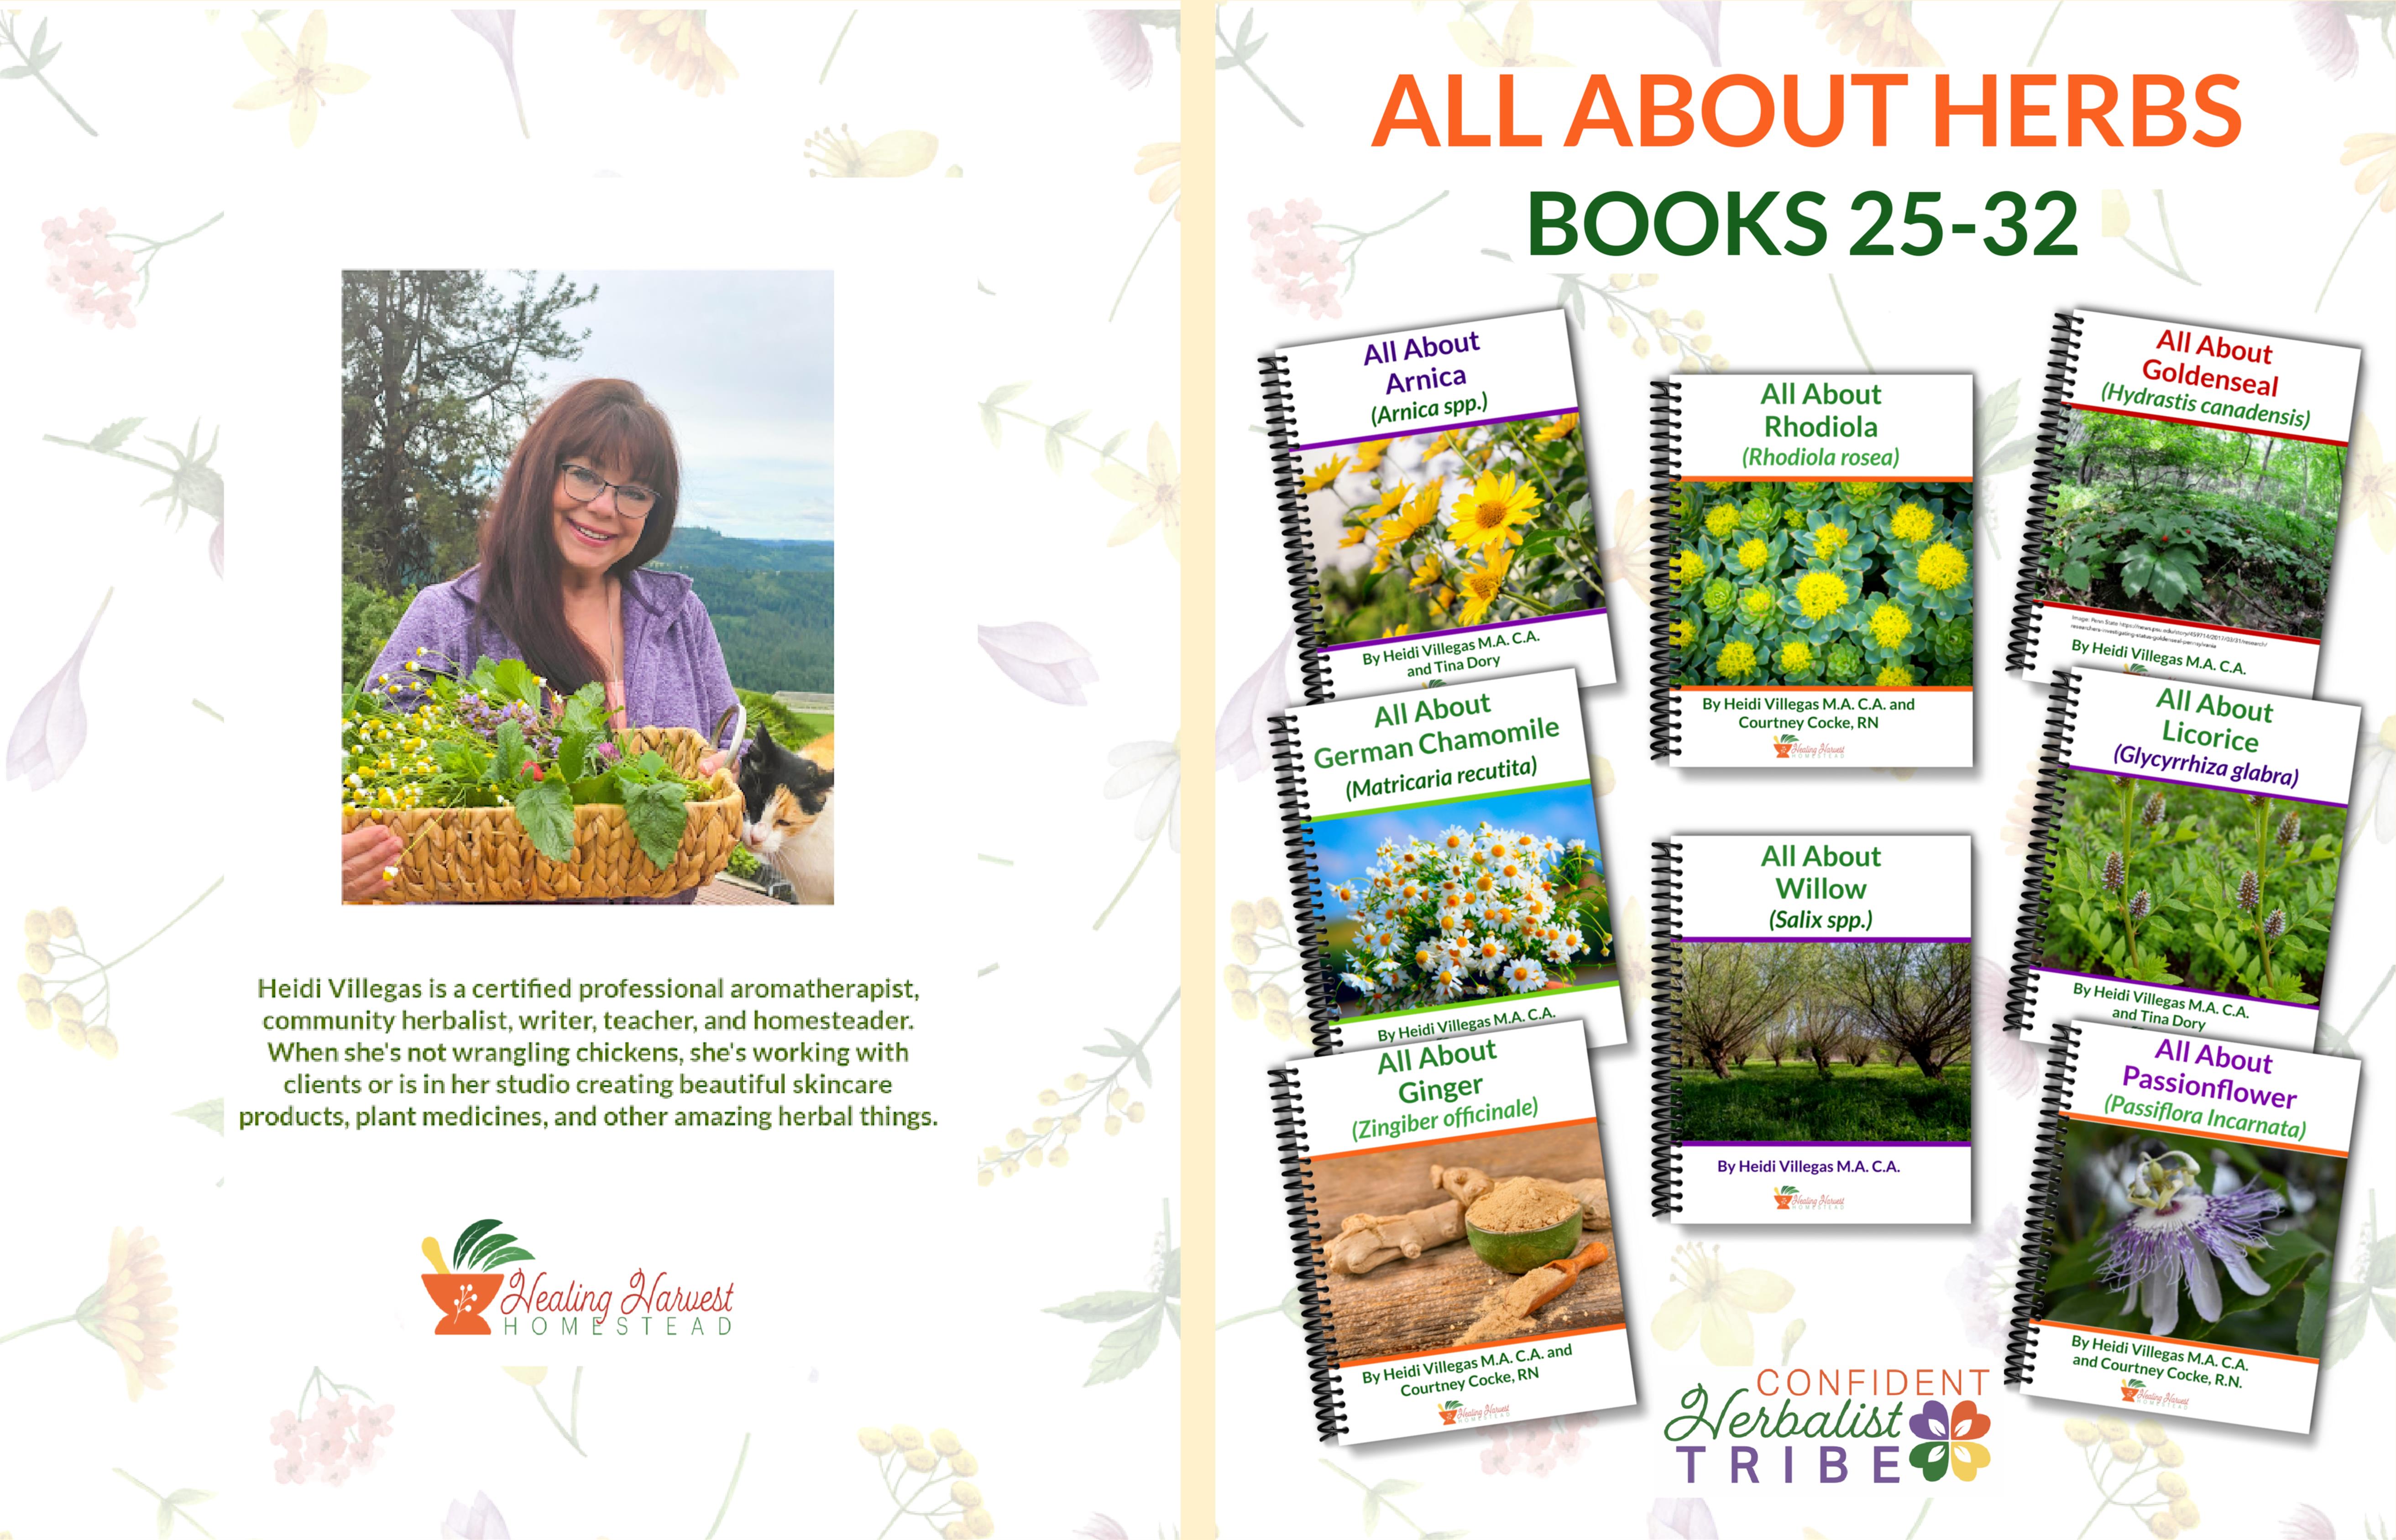 All About Herbs Books 25-32 cover image